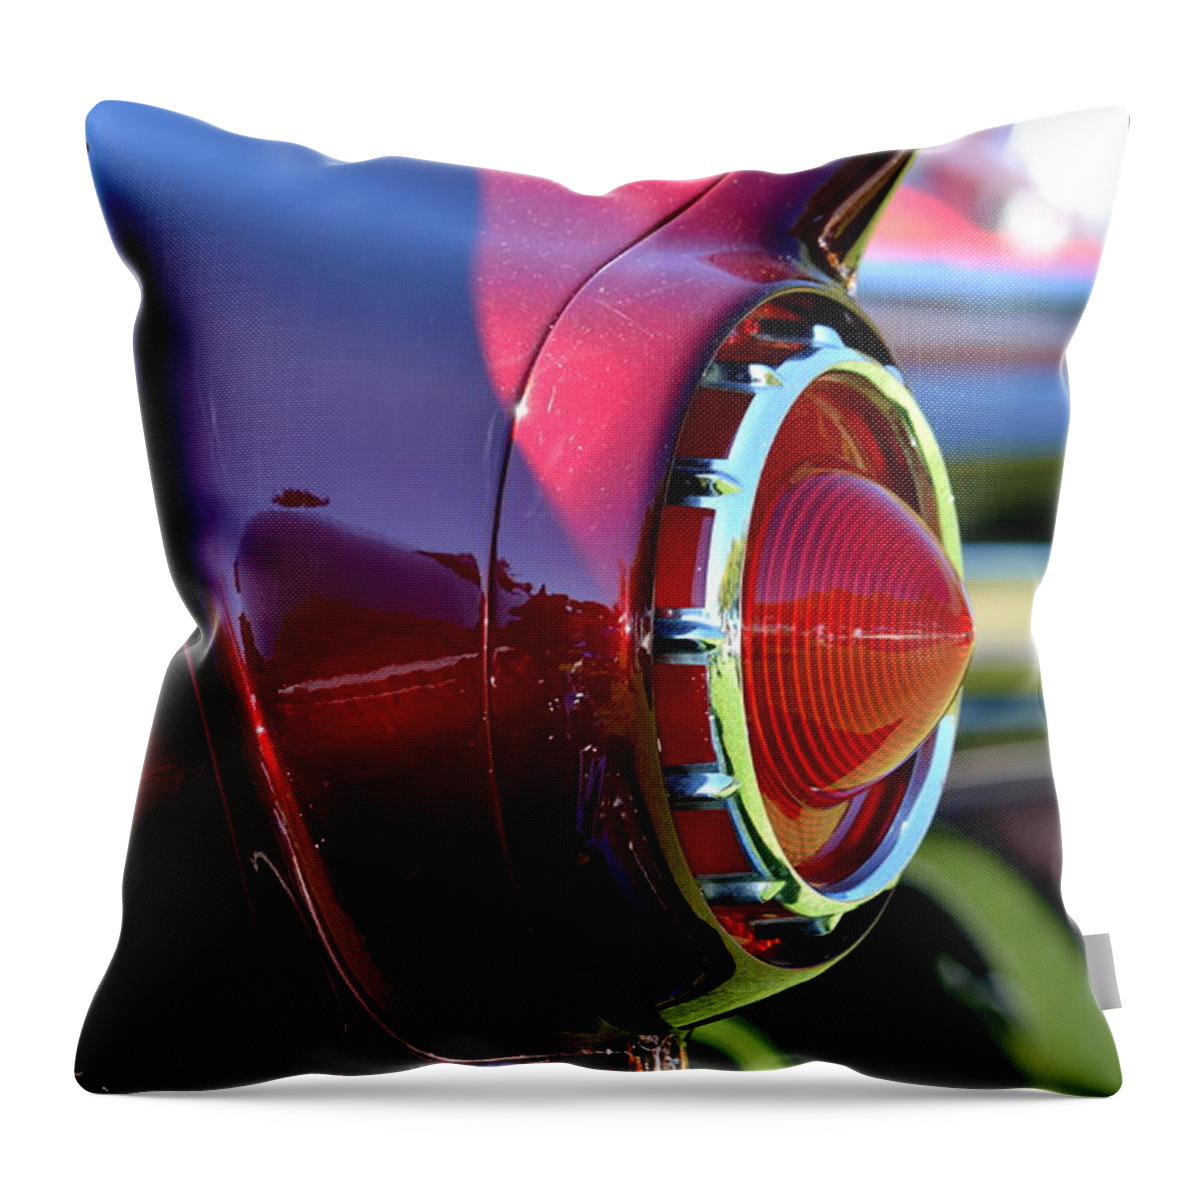 Ford Throw Pillow featuring the photograph Ford Taillight by Dean Ferreira